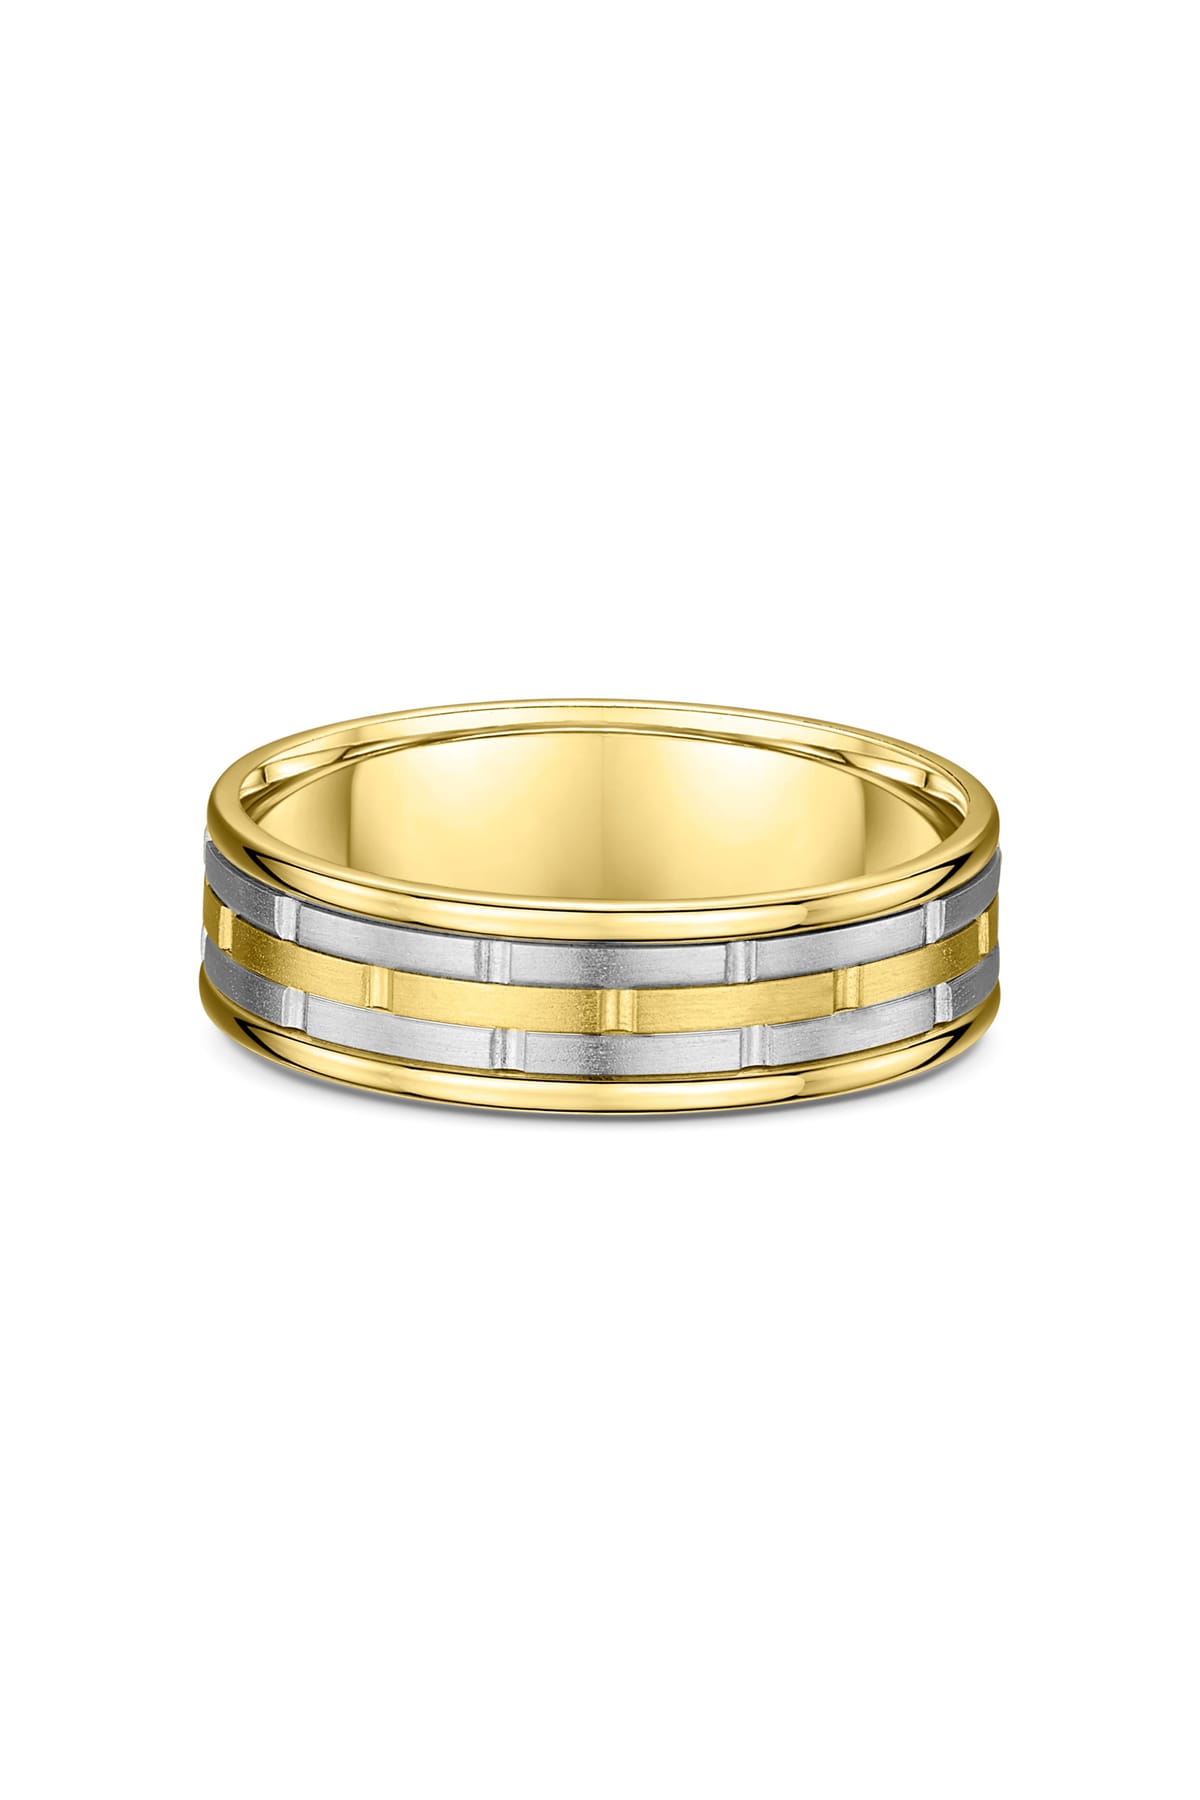 Men's Deluxe Wedding Ring available at LeGassick Diamonds and Jewellery Gold Coast, Australia.